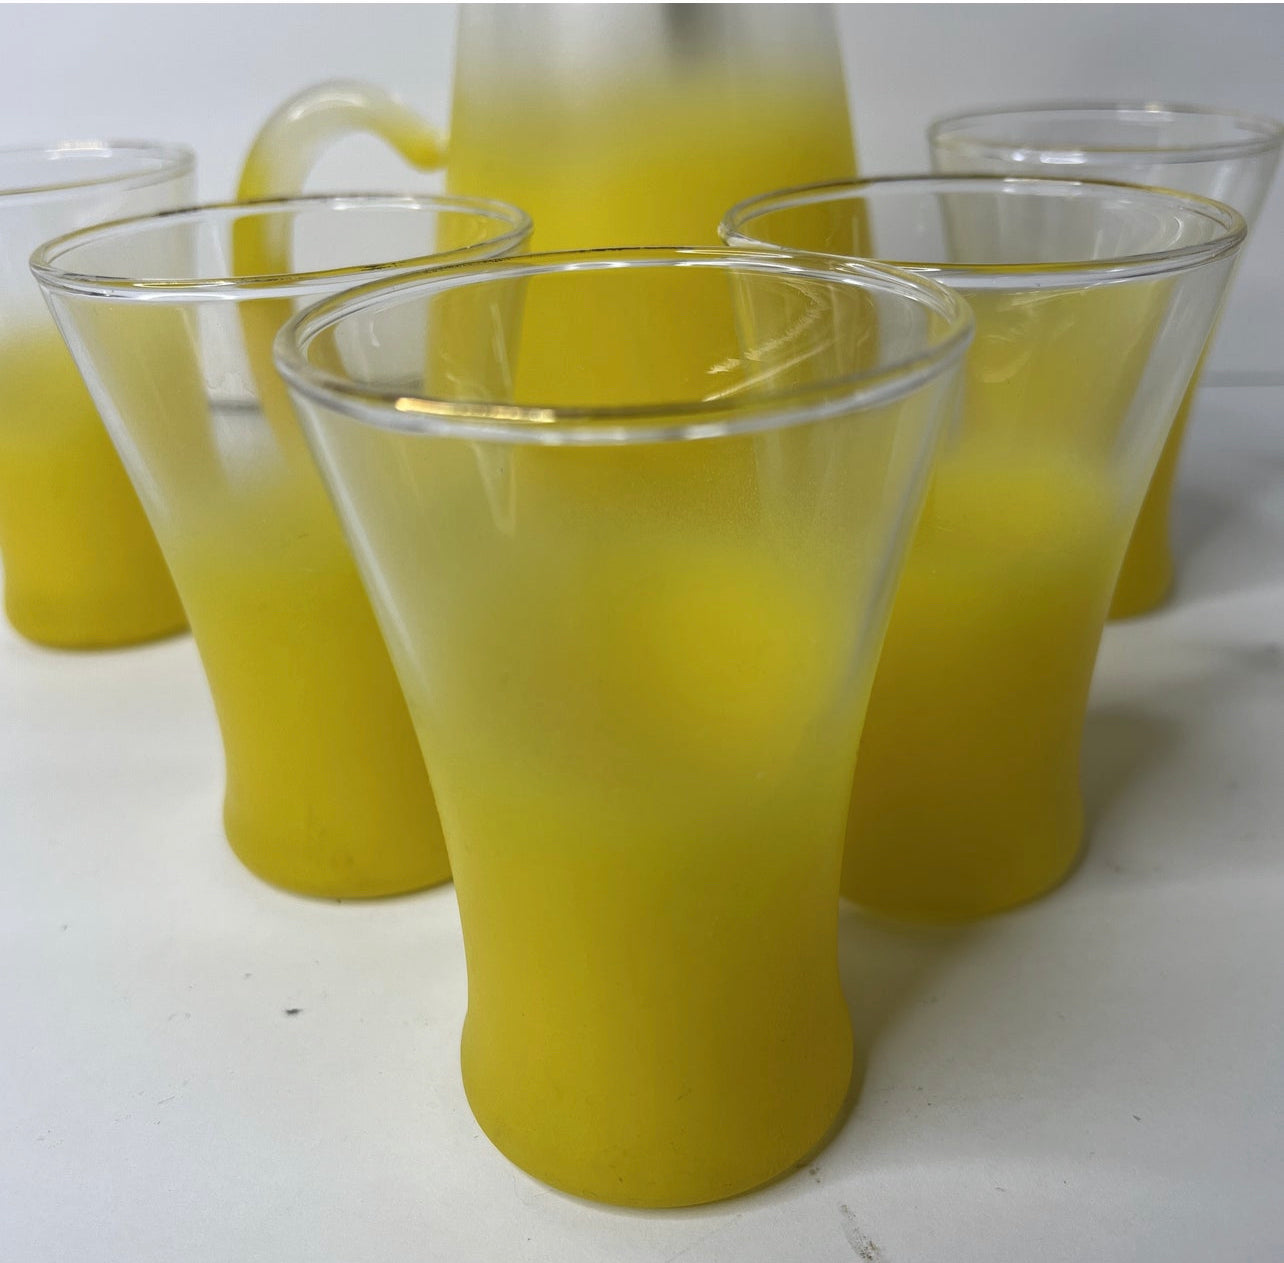 Bright Yellow Mid Century Modern Water Pitcher and Glasses